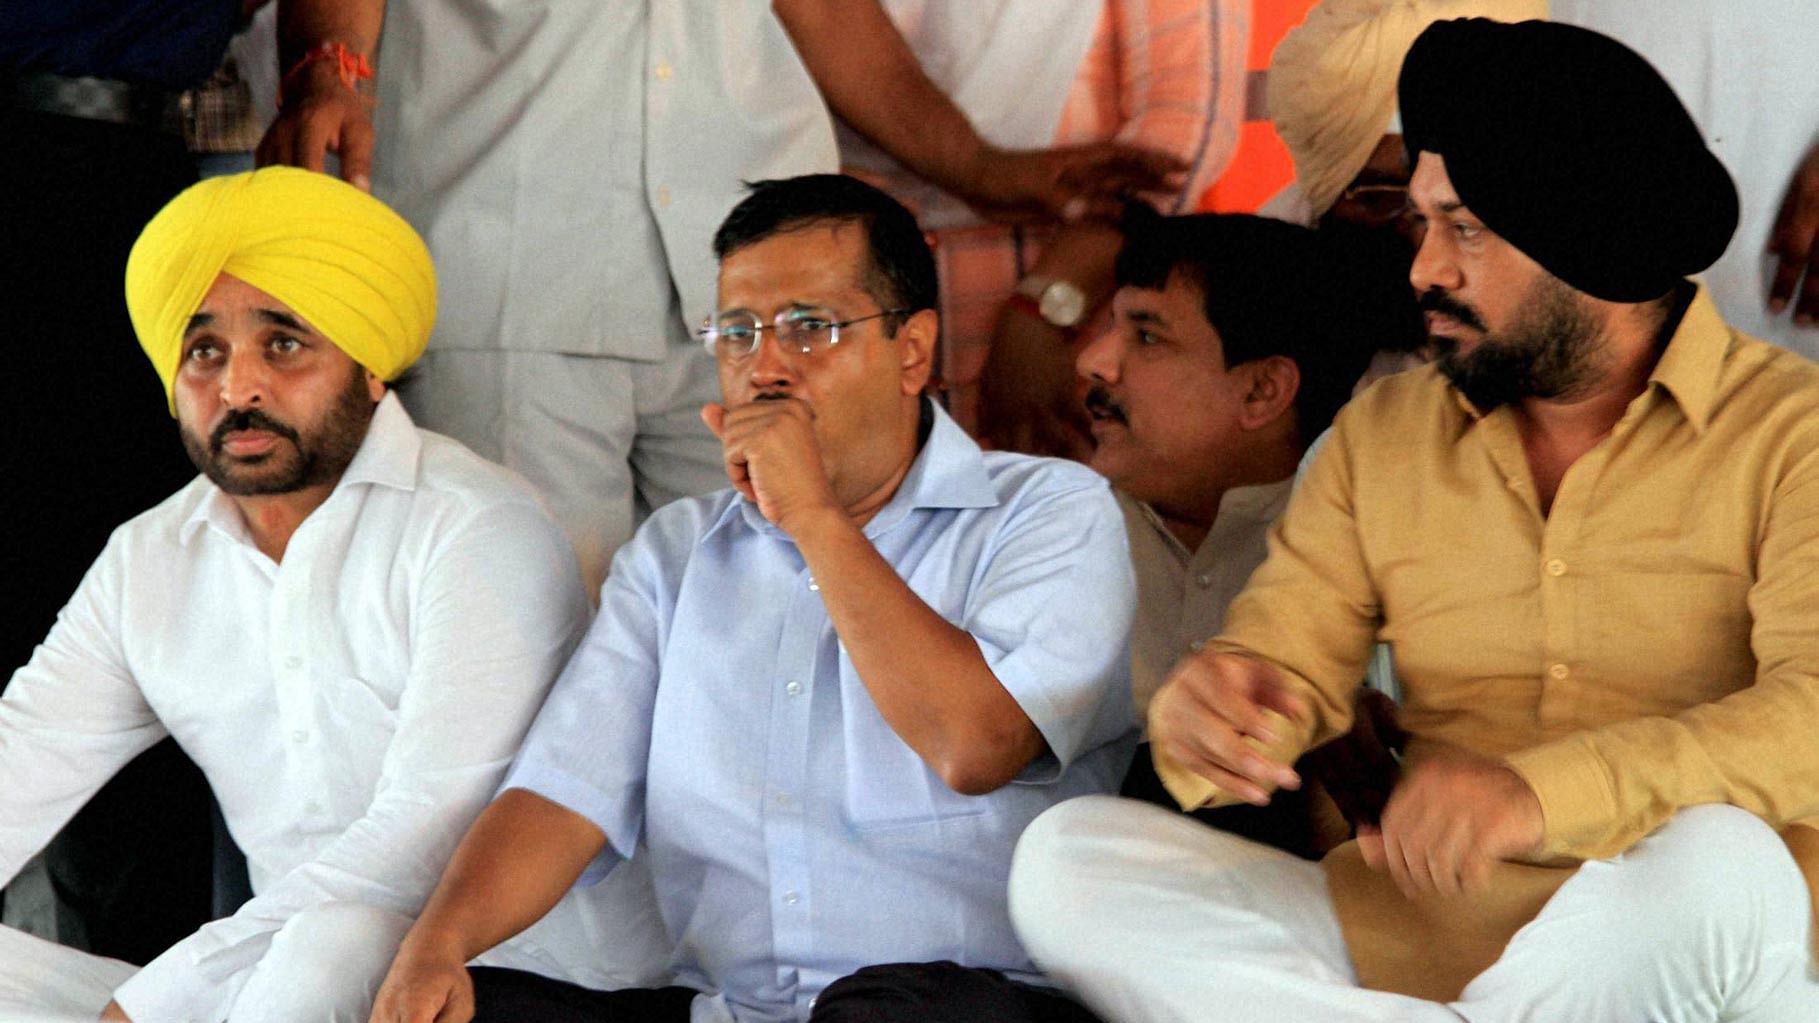 Arvind Kejriwal flanked by AAP Punjab convener, comedian-turned-politician Gurpreet Ghuggi (right) , and AAP MPs from Punjab, Bhagwant Mann (left). (Photo: PTI)